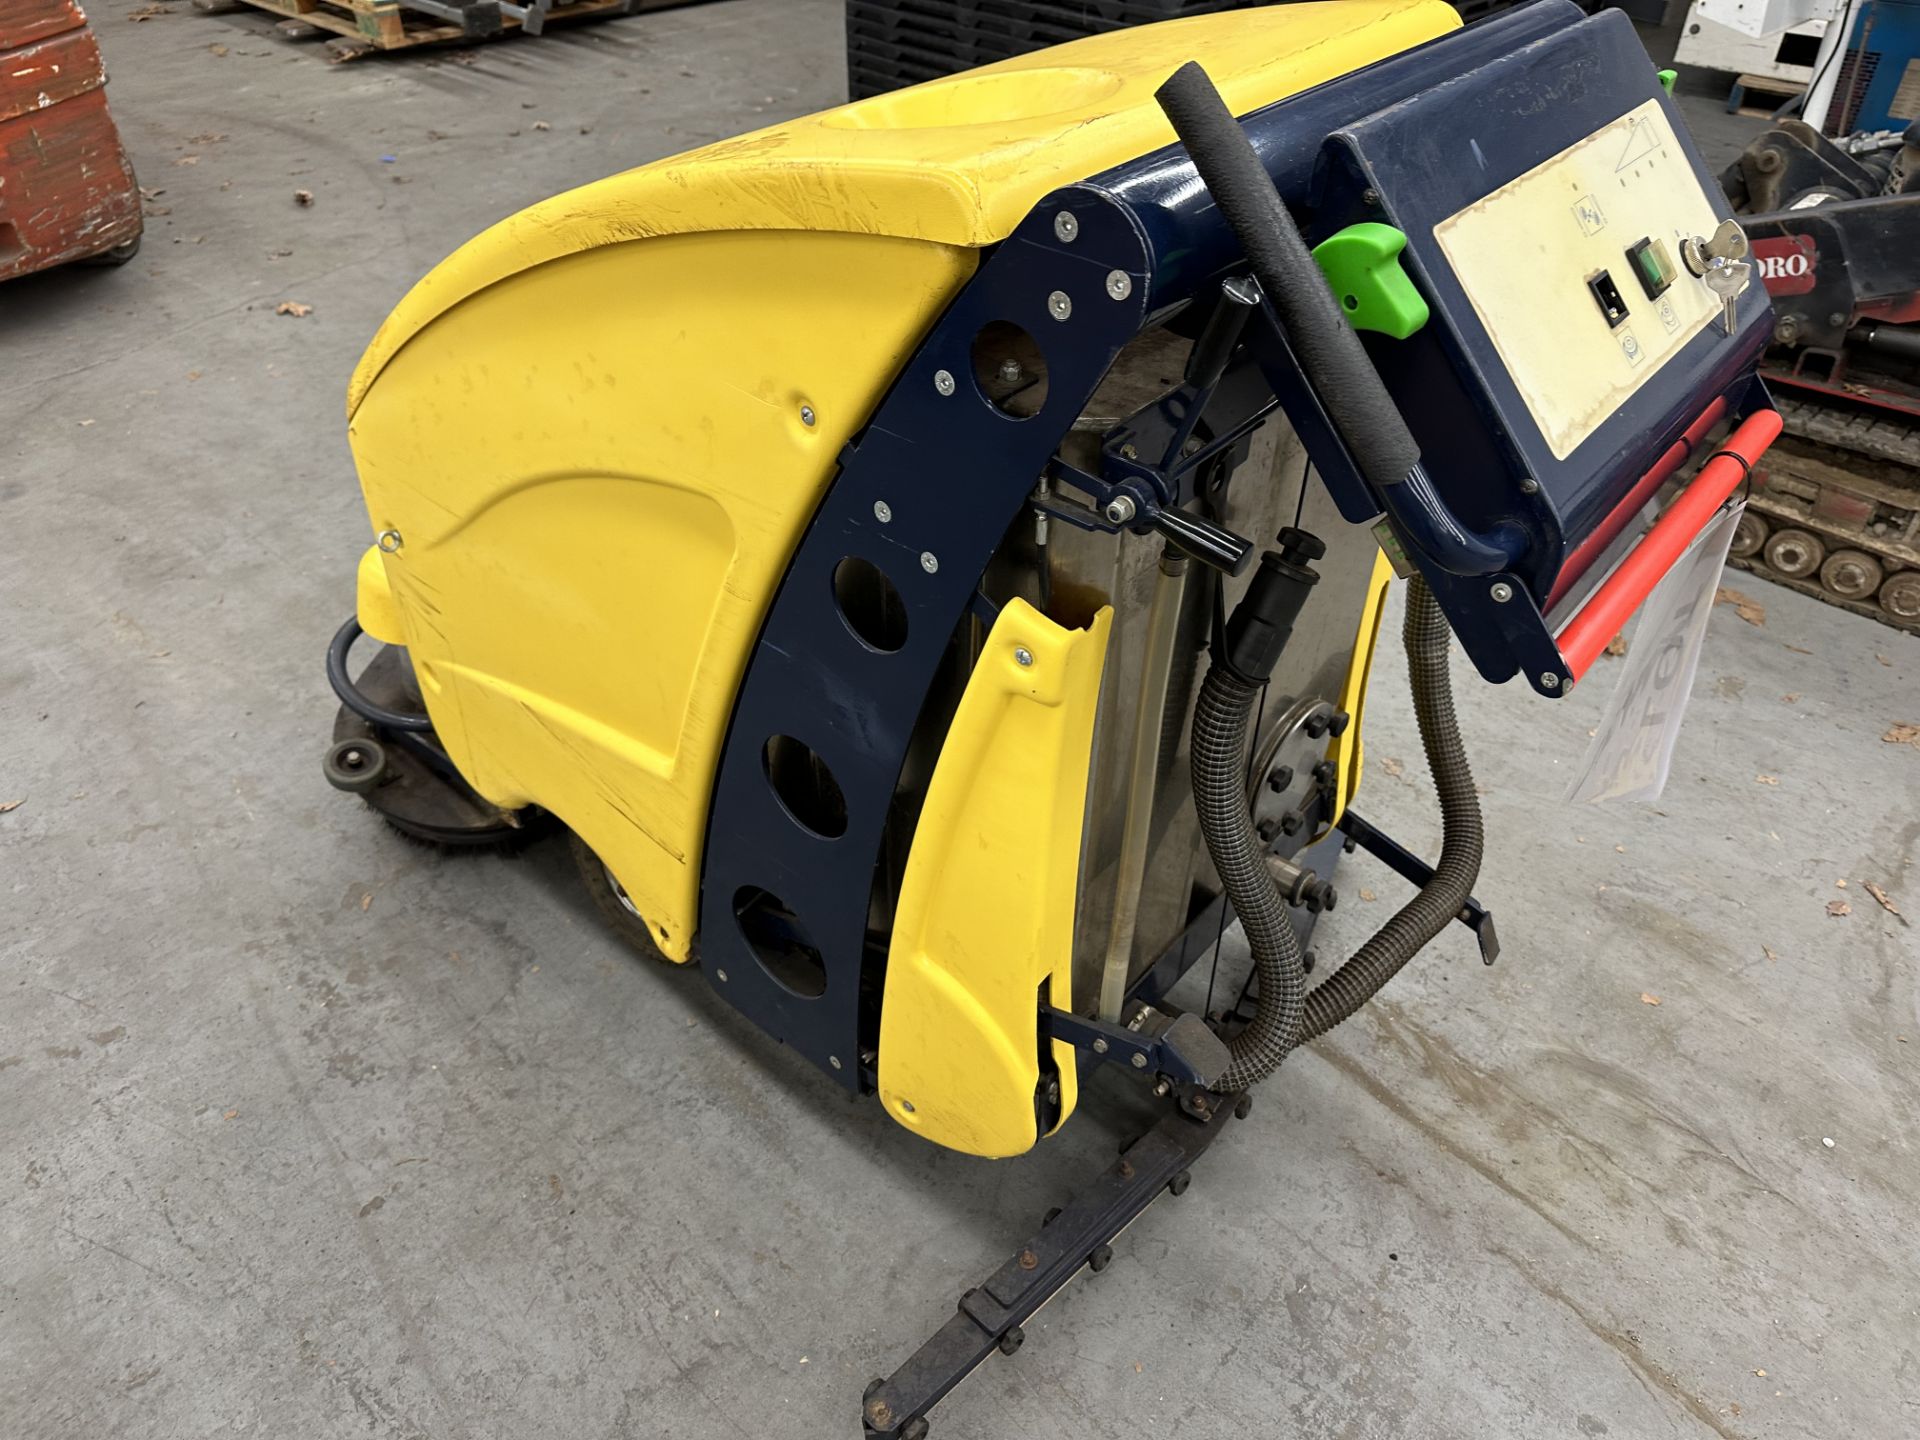 TSM Industrial Floor Cleaning Machine w/(2) 36V (3 x12) Batteries (NO FURTHER INFO) (WILL POST VIDEO - Image 4 of 4